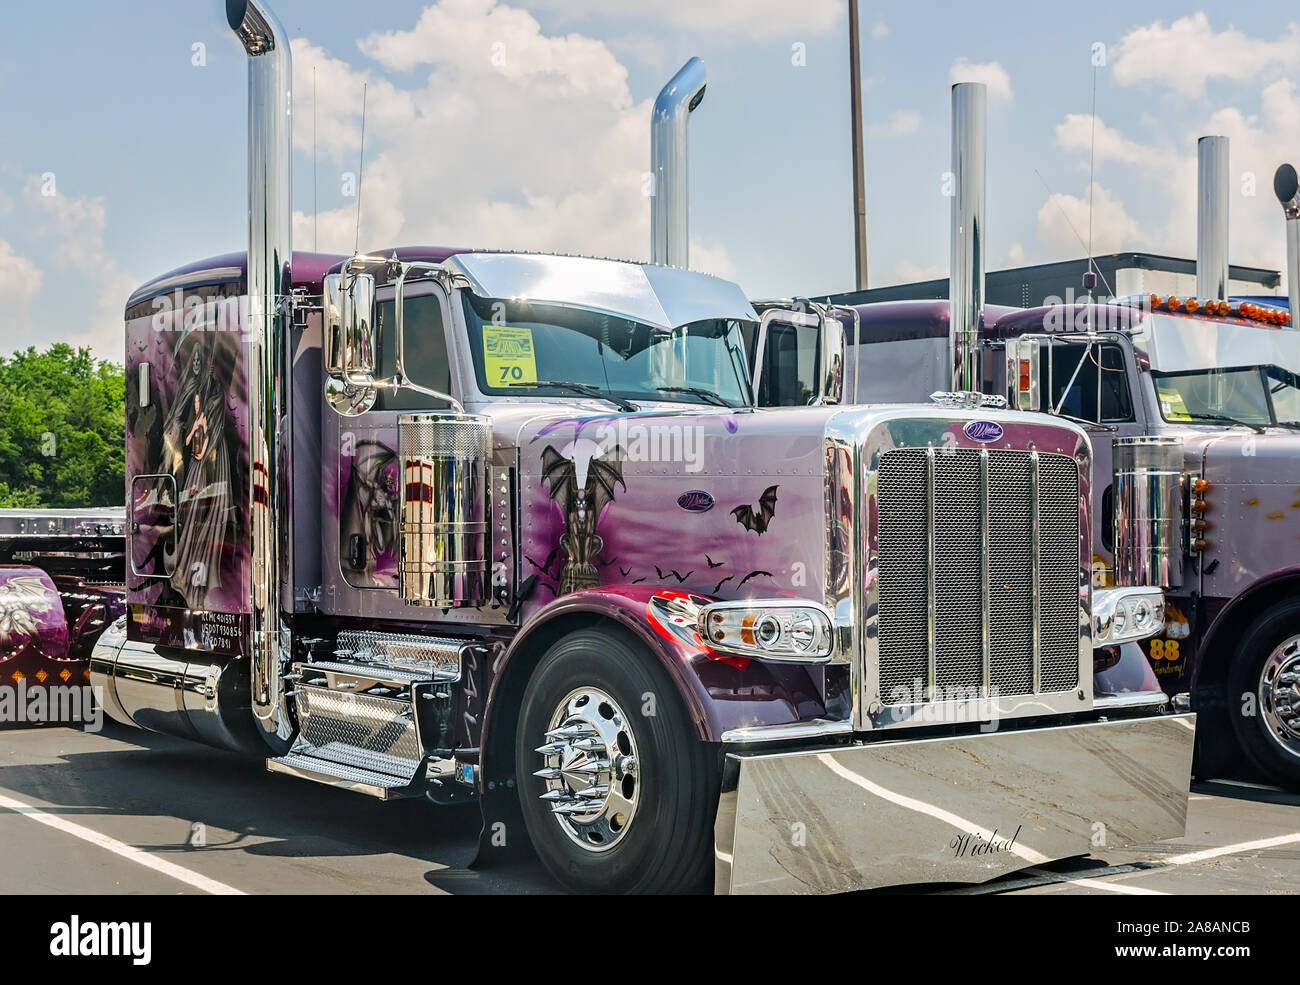 A 2015 Peterbilt 379 waits to be judged at the 34th annual Shell Rotella SuperRigs truck beauty contest, June 11, 2016, in Joplin, Missouri. Stock Photo